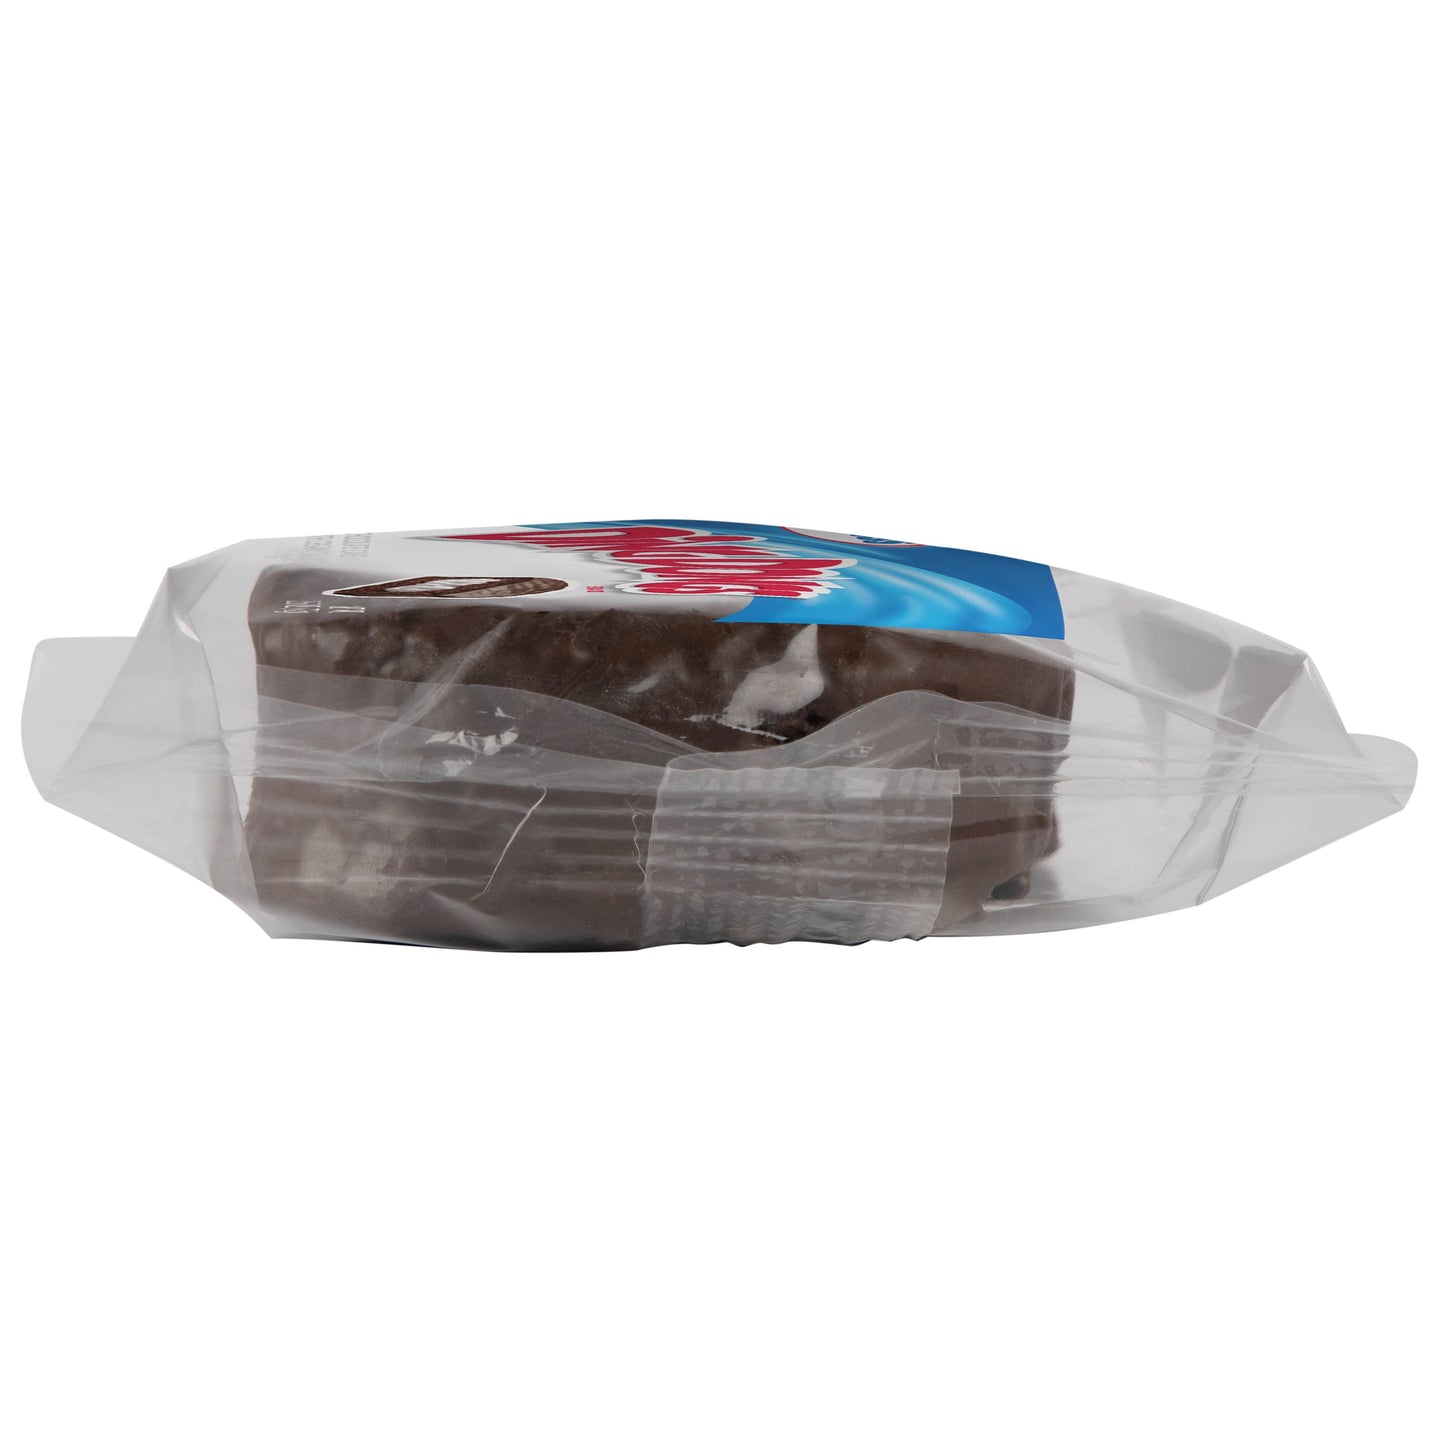 Hostess Chocolate Ding Dongs, Single Serve, 2 Count, 2.55 oz